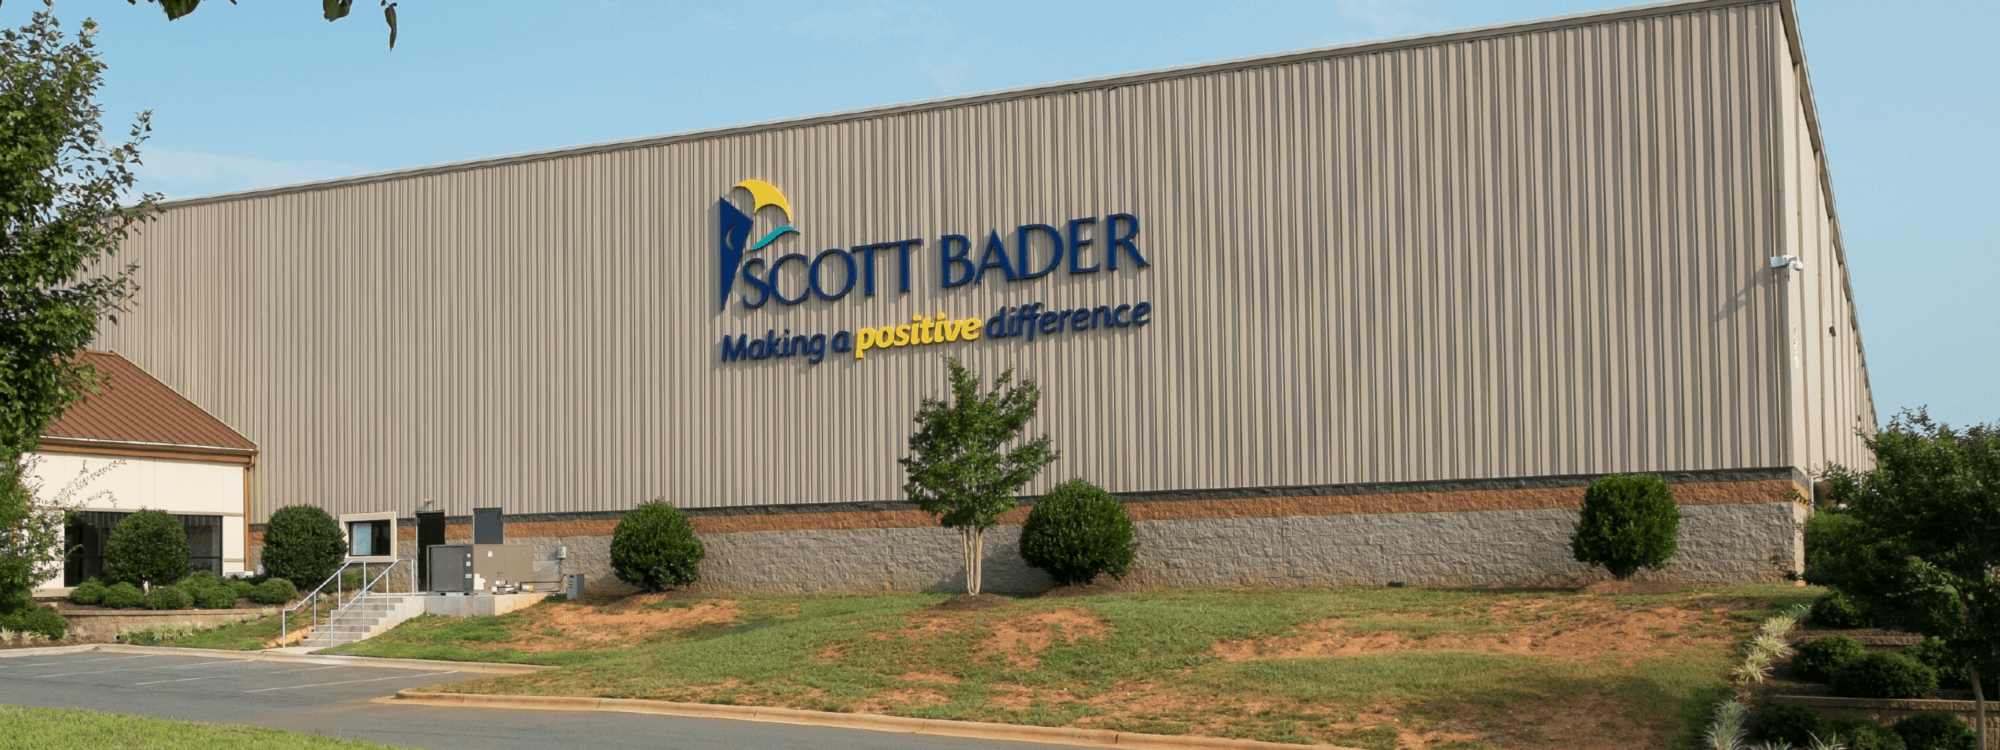 Scott Bader’s new £12.5M state-of-the-art site is now operational in North Carolina